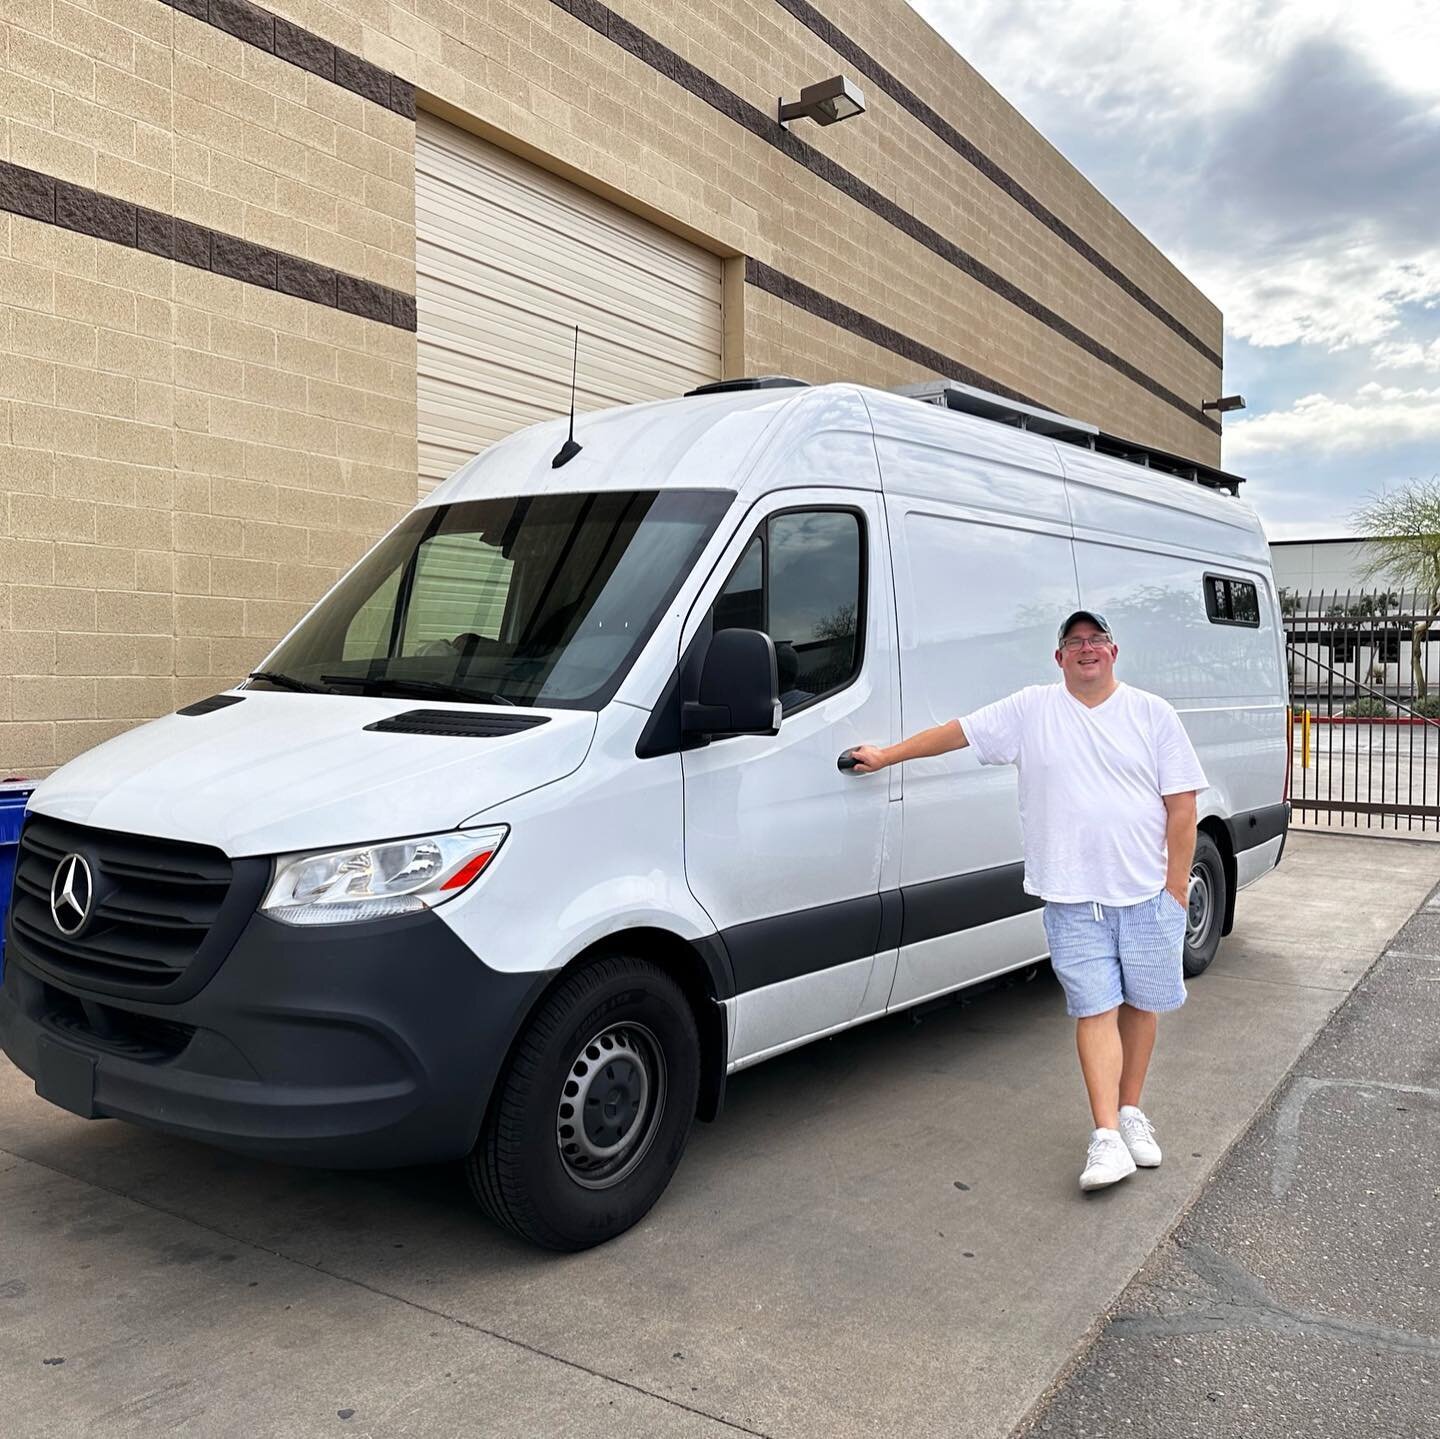 What&rsquo;s love without support? 
We support our products so you will love them for years to come! ❤️❄️

Matt is headed out for a long trip and stopped by to ensure his air conditioner is in tip top shape!

#van #vanlife #vanbuild #vanconverison #b